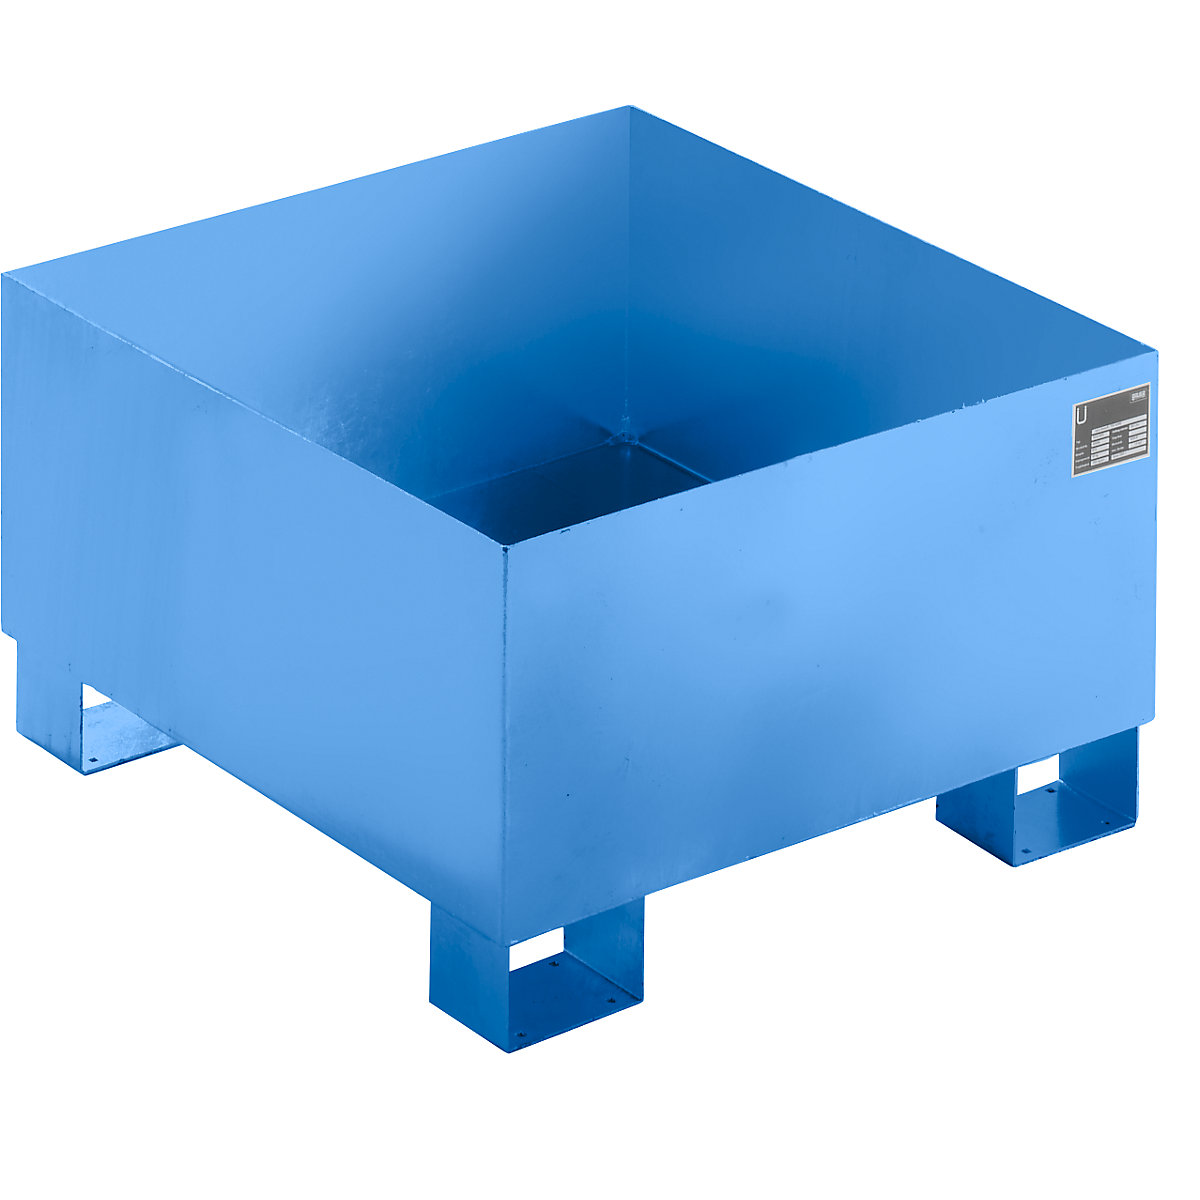 Sump tray made from sheet steel, LxWxH 800 x 800 x 465 mm, blue RAL 5012